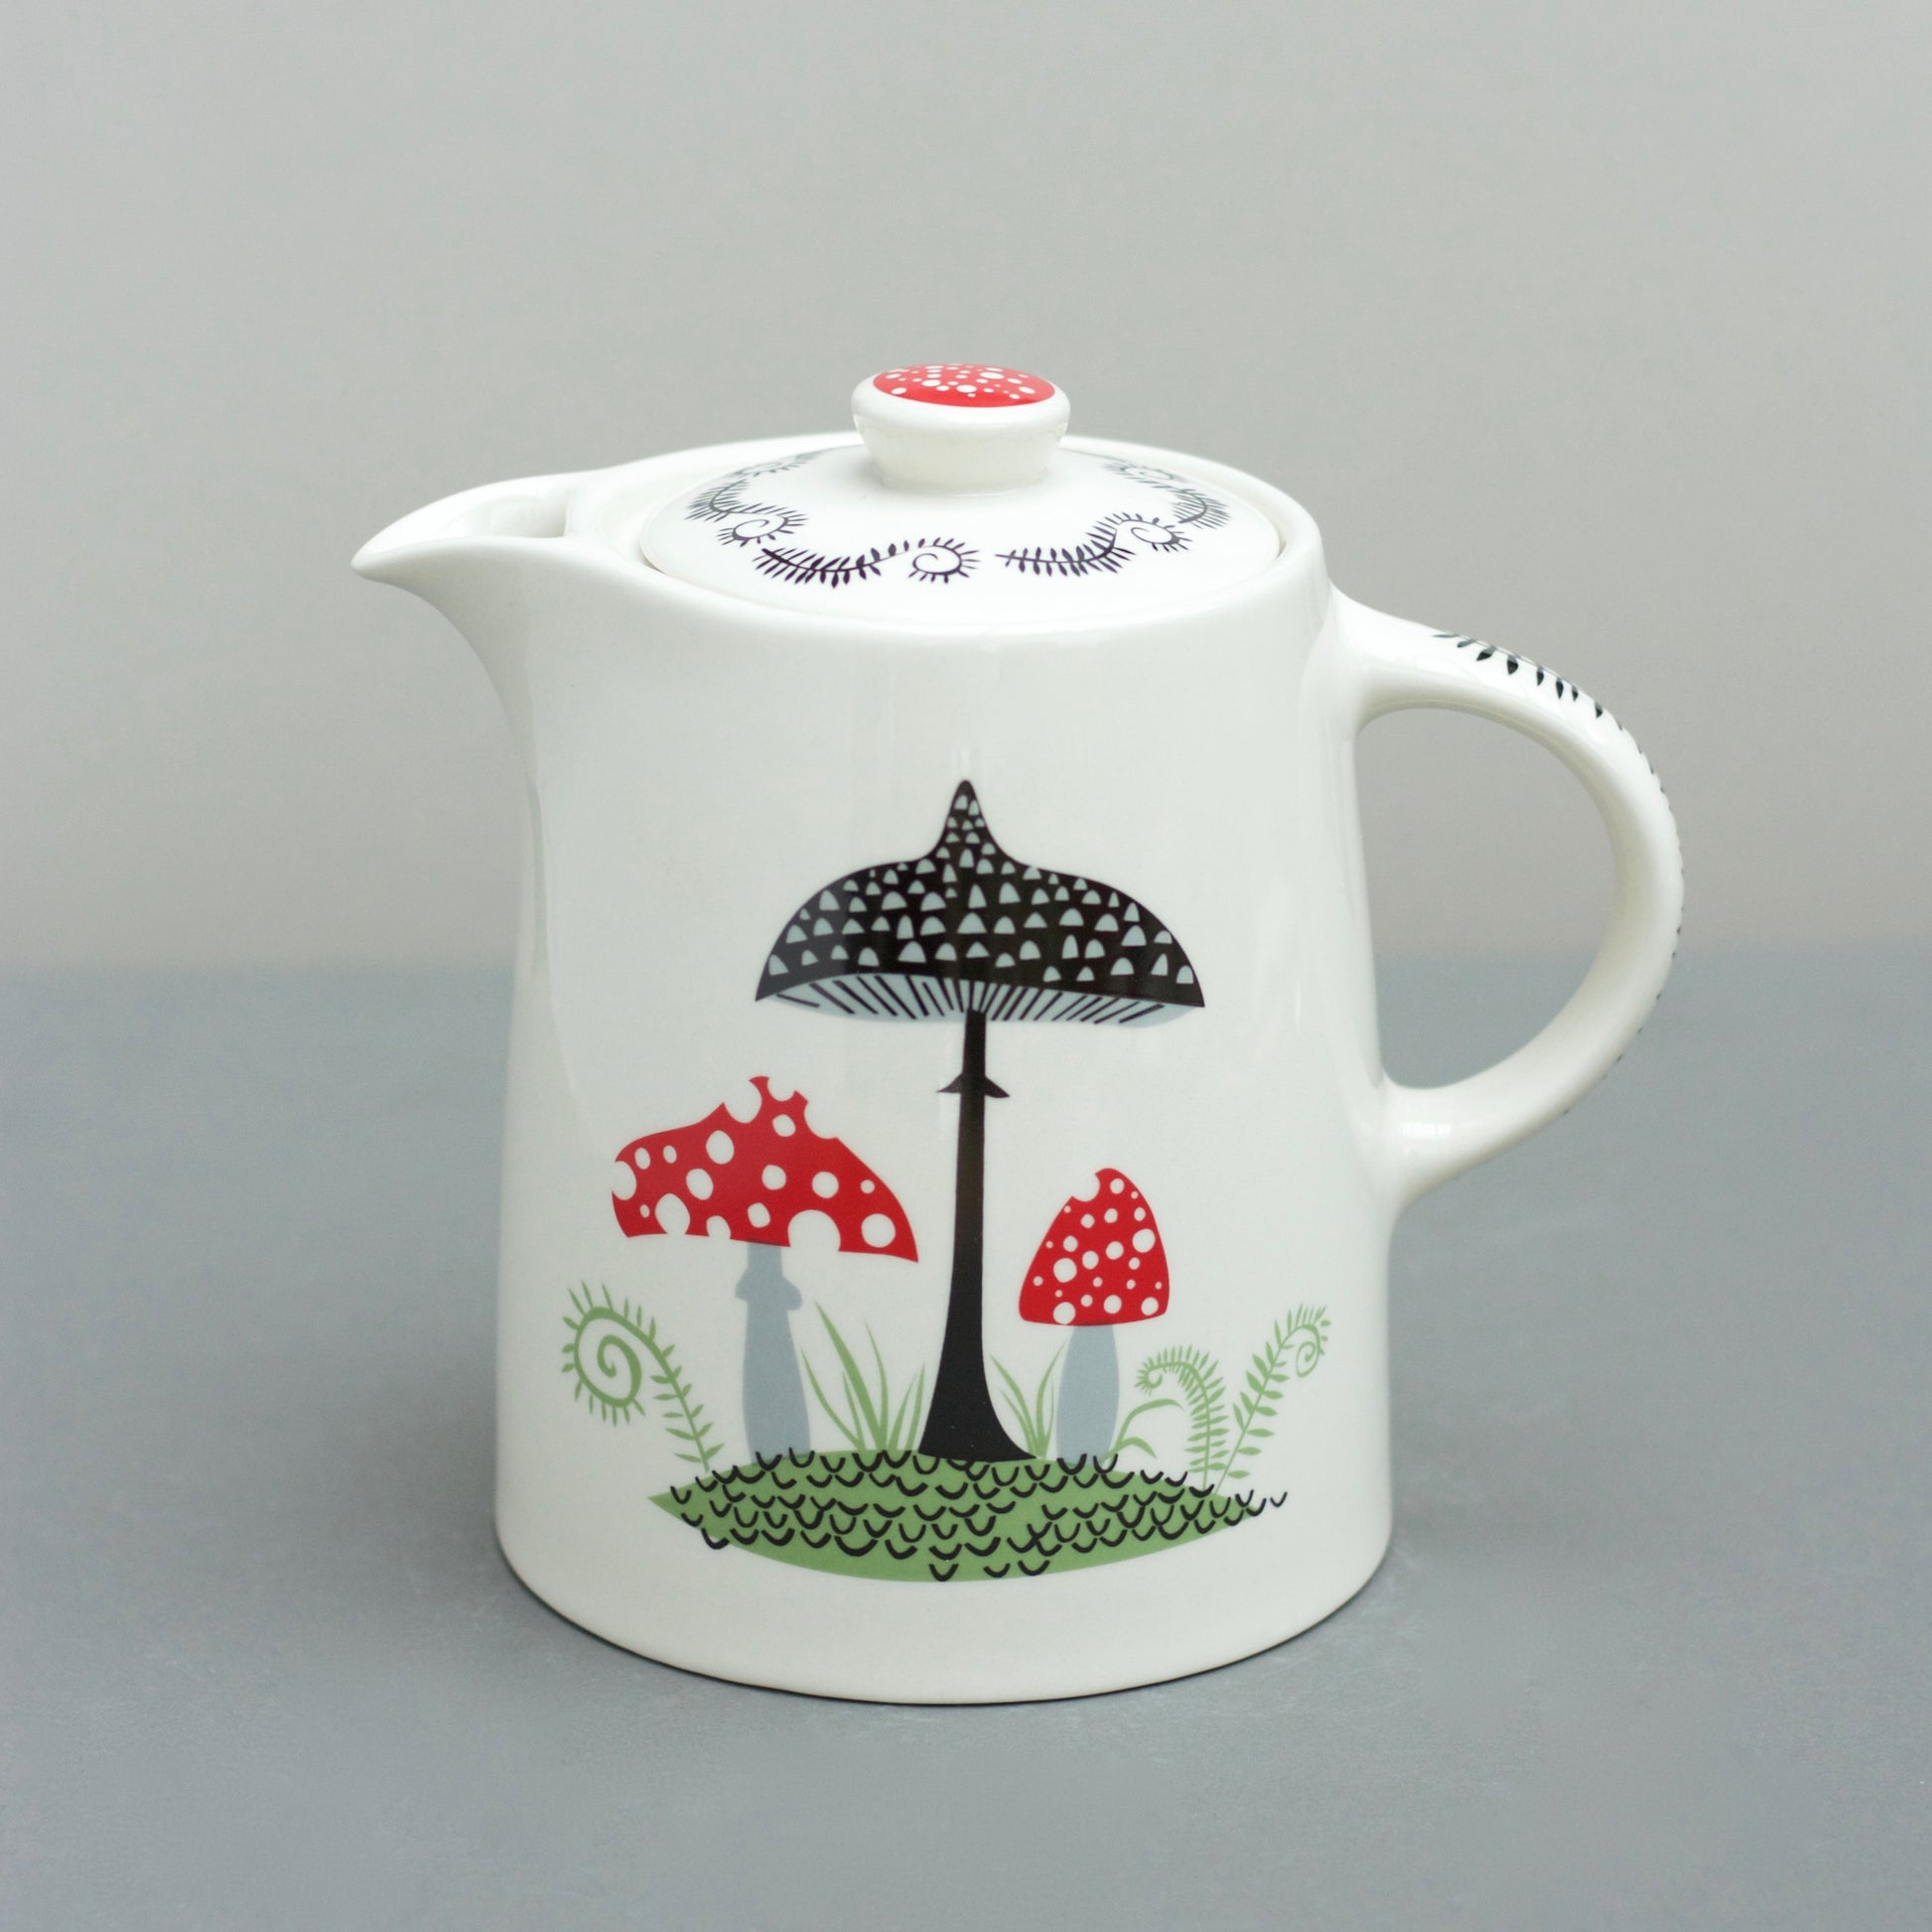 Toadstool Teapot by Hannah Turner | Red Lobster Gallery 